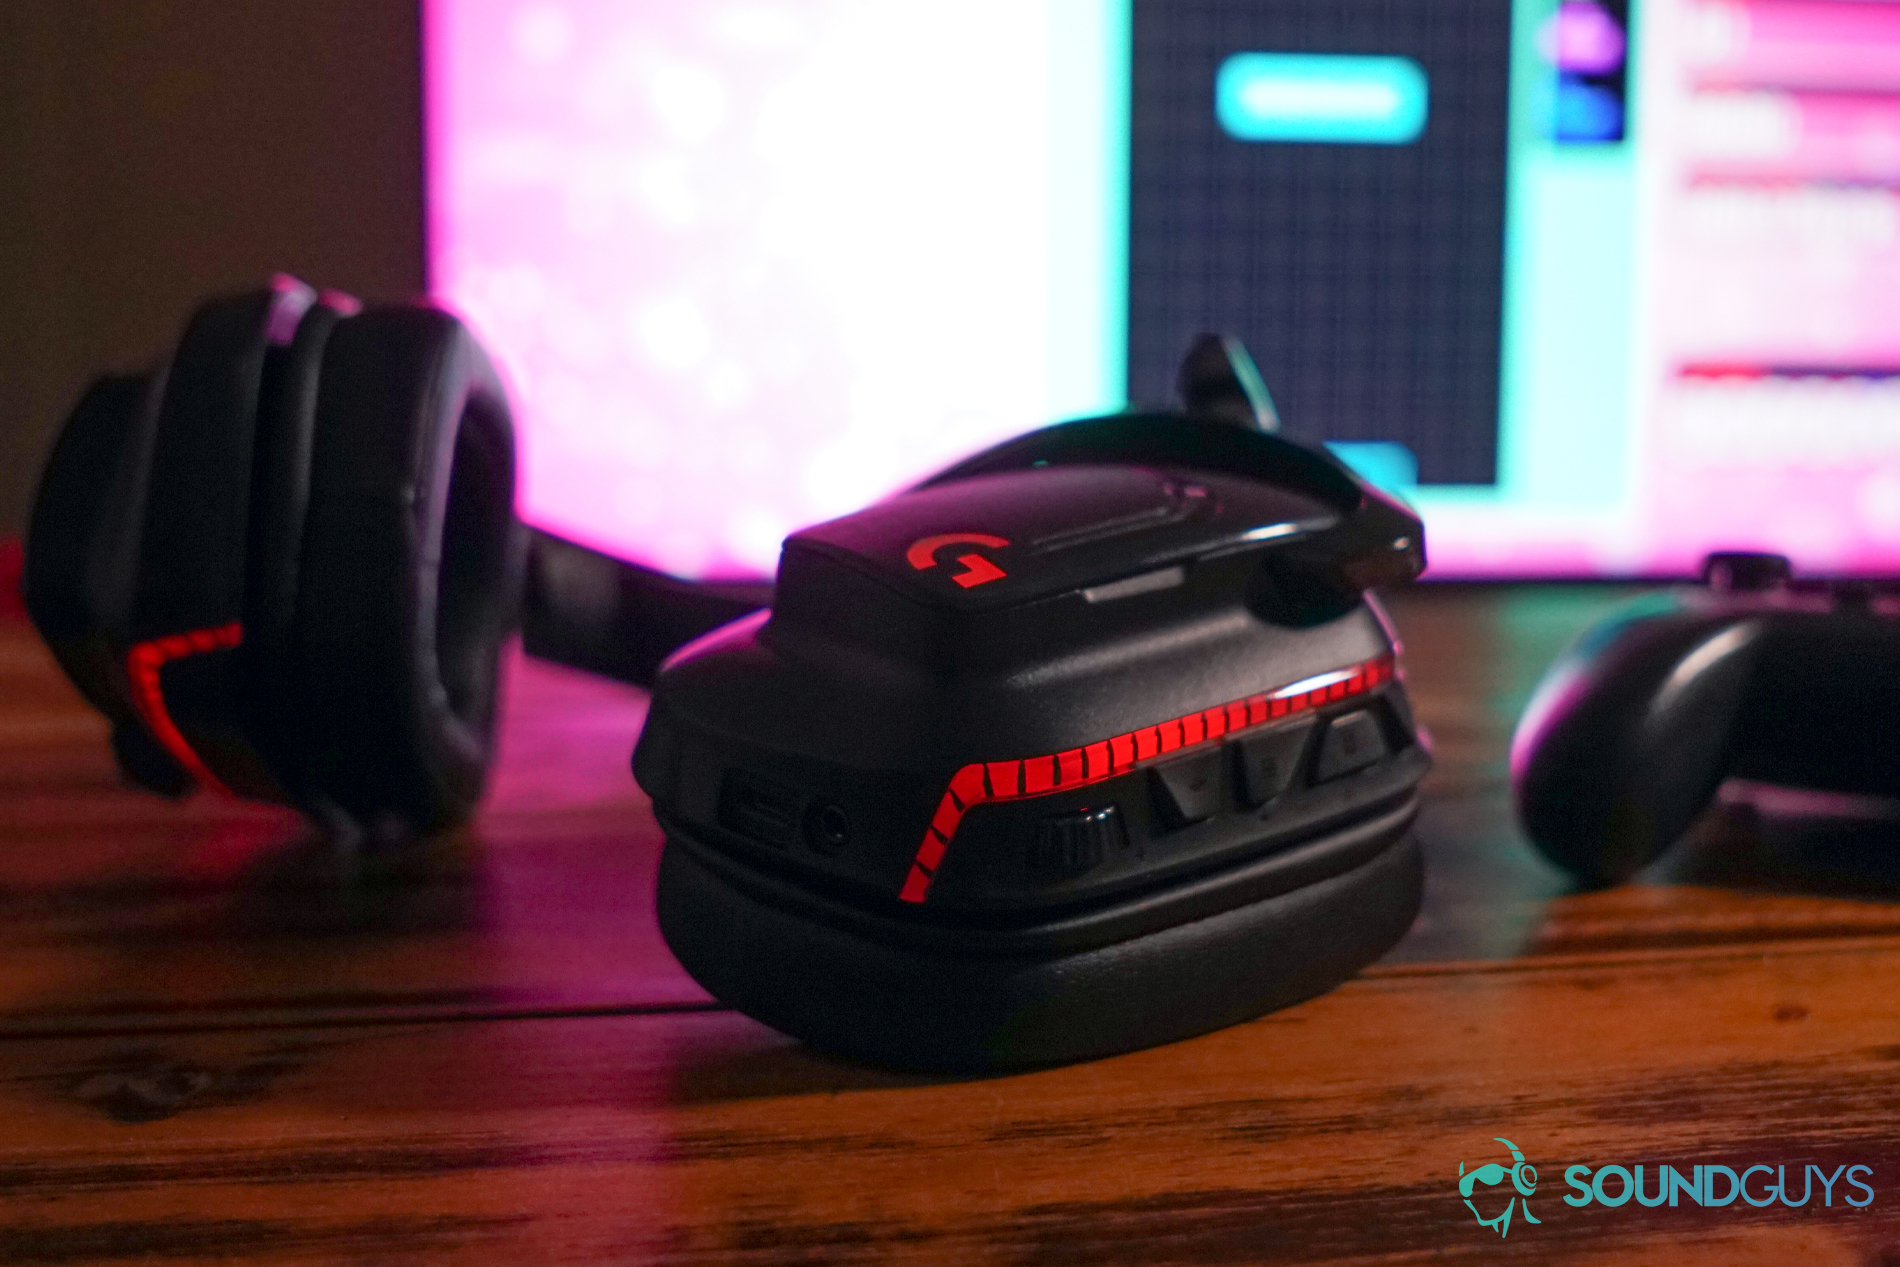 The Logitech G935 sits on a wooden table in front of a TV with a Nintendo Switch running Tetris 99, next to a Nintendo Switch Pro Controller